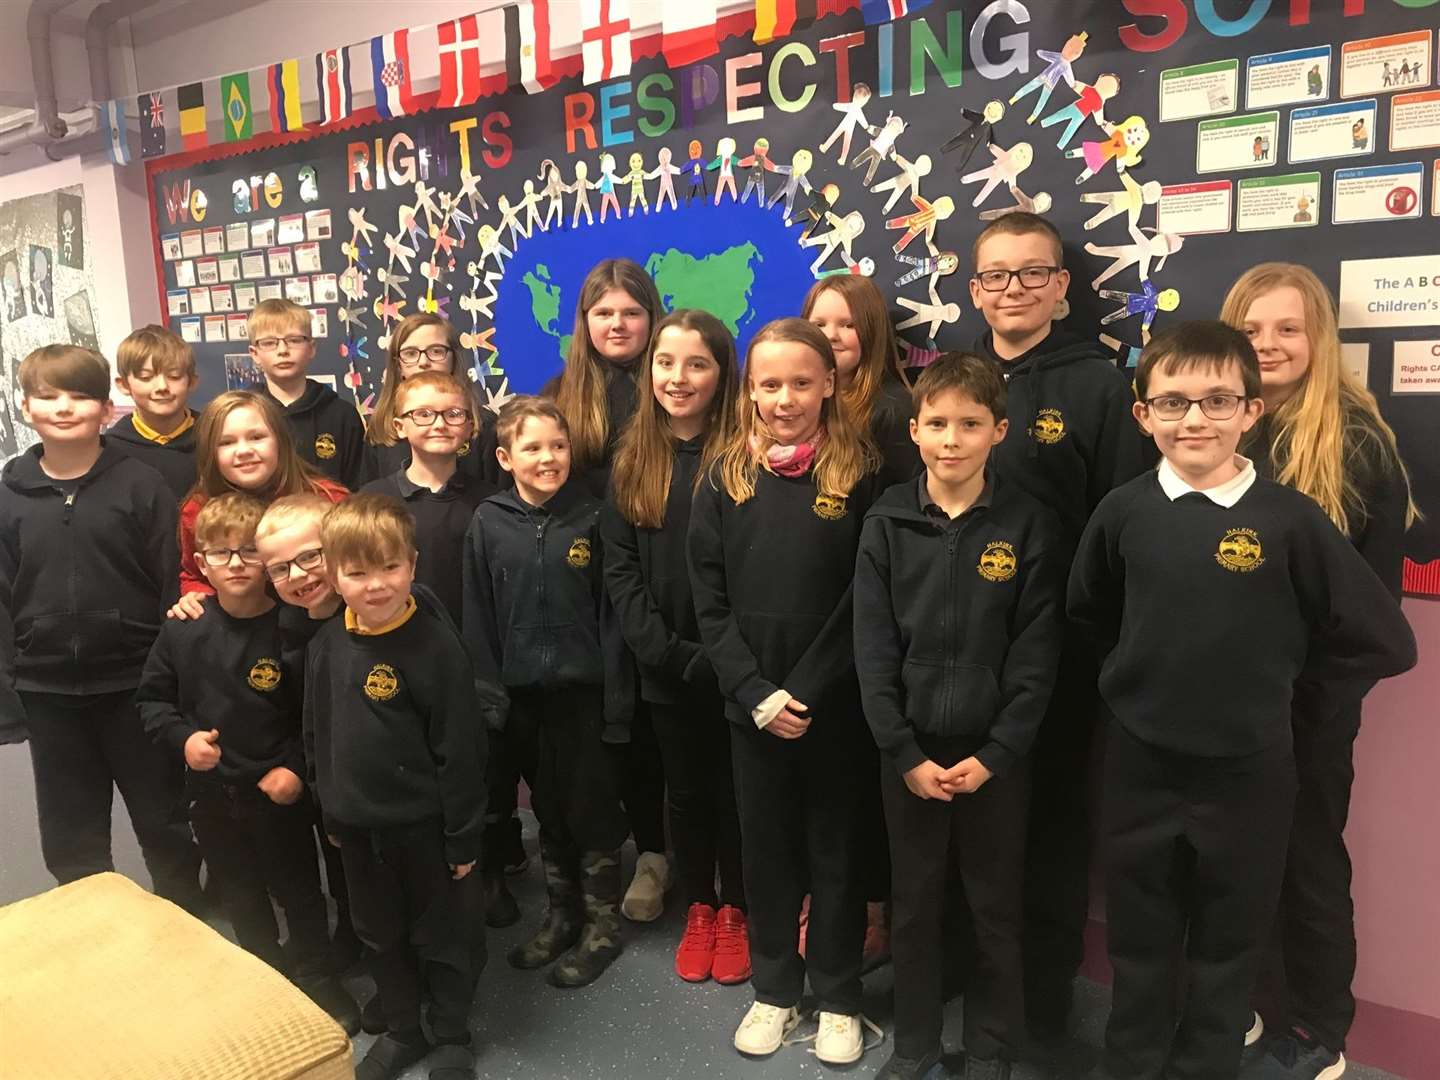 Children who were members of the Rights Respecting School steering group at Halkirk and led the work throughout the year.